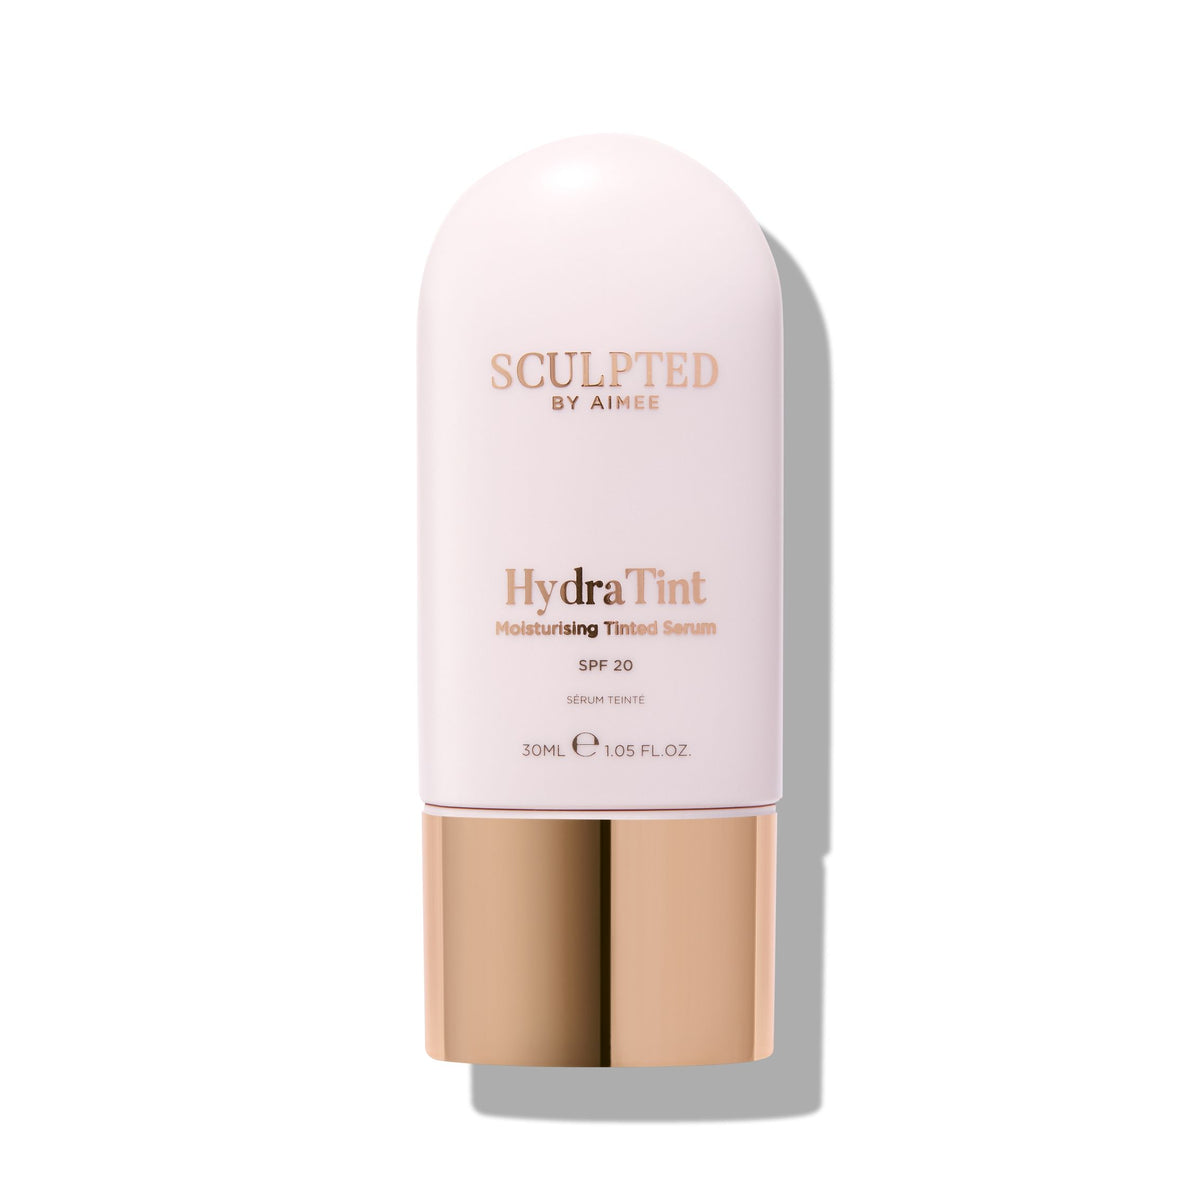 HydraTint – Tinted Skin Serum | Sculpted By Aimee | Bases